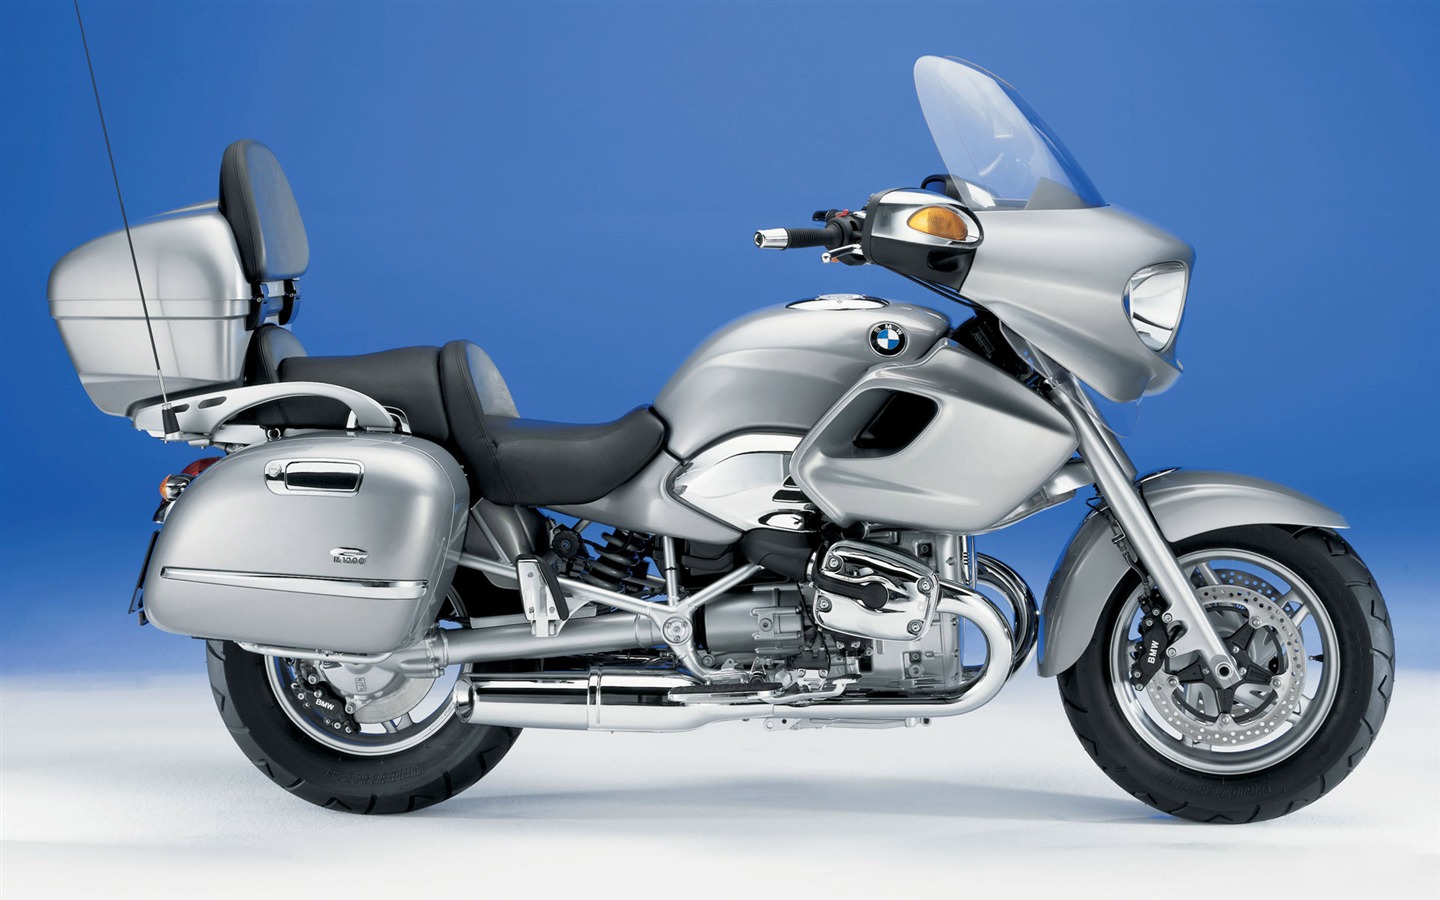 BMW motorcycle wallpapers (2) #20 - 1440x900